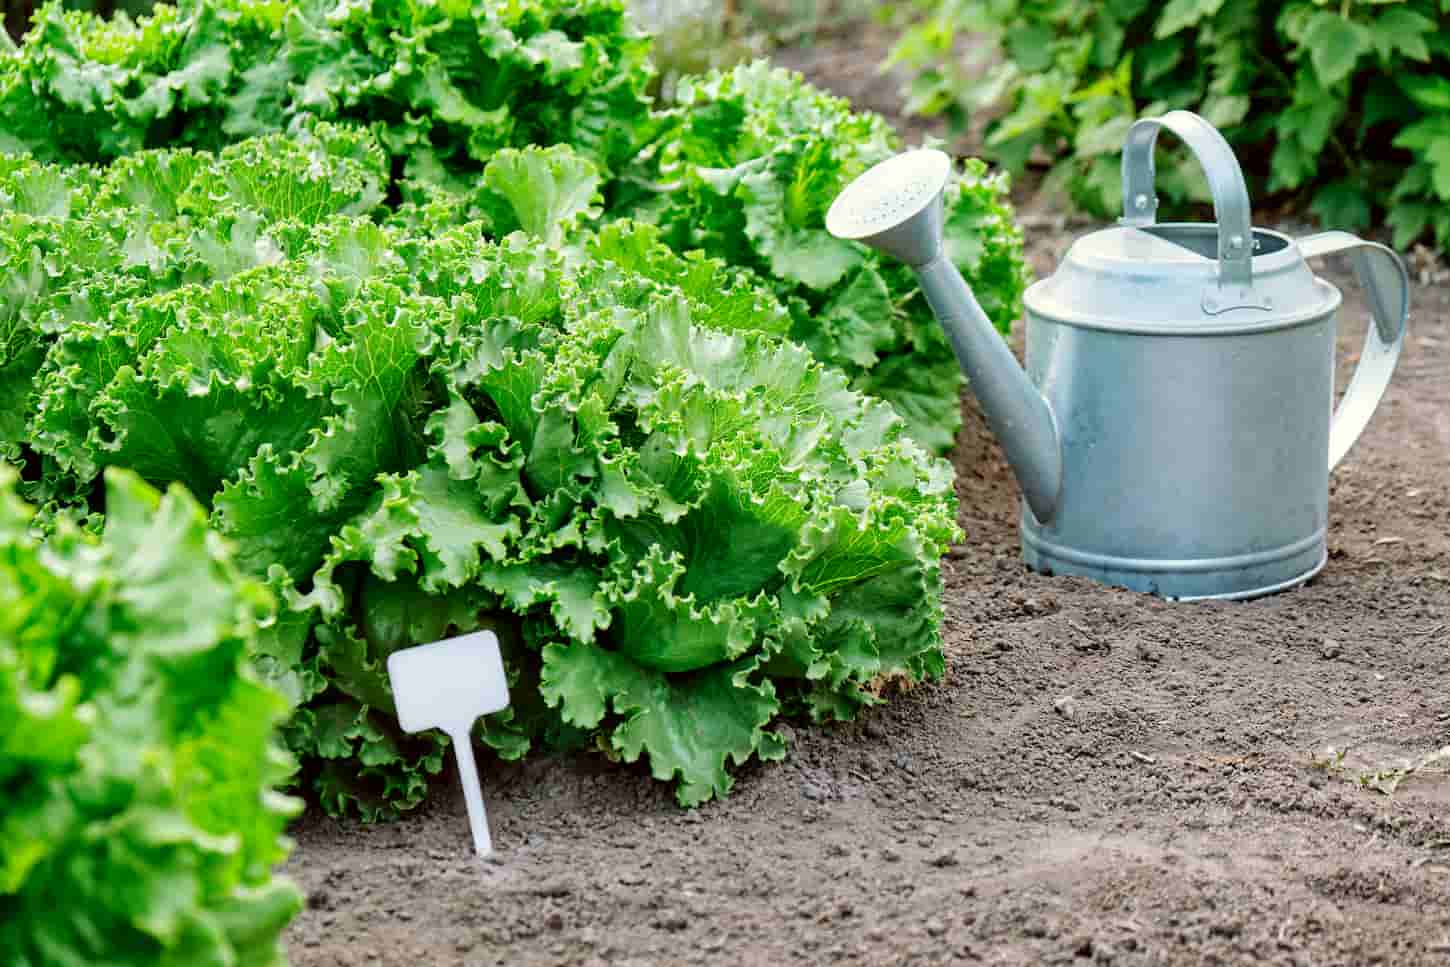 An image of growing lettuce plants in a garden bed with a watering can on the side.